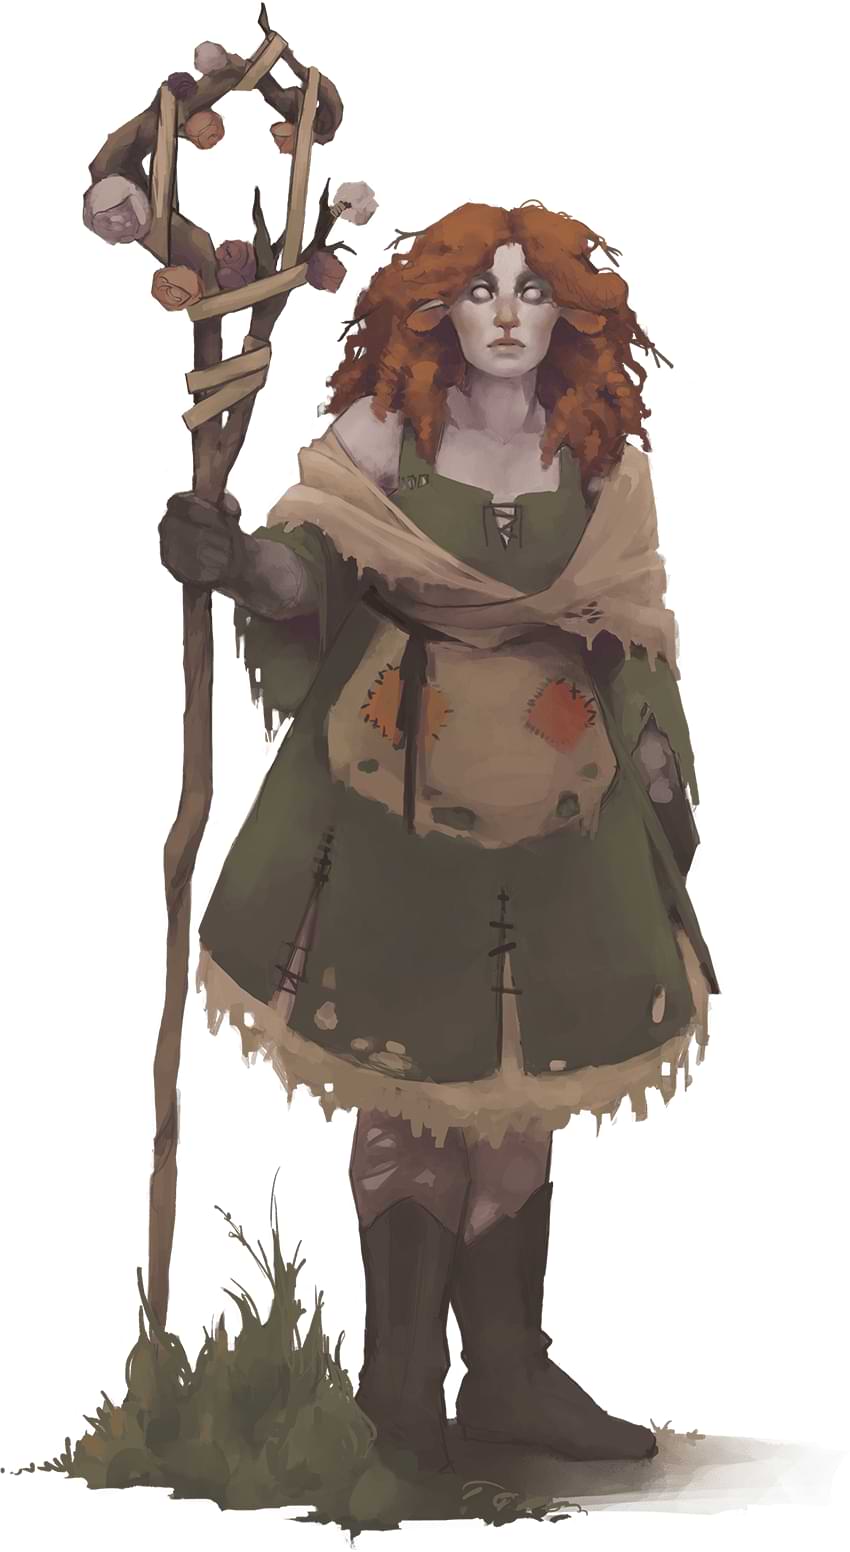 A firbolg Circle of the Blighted druid stands staring with a staff in hand